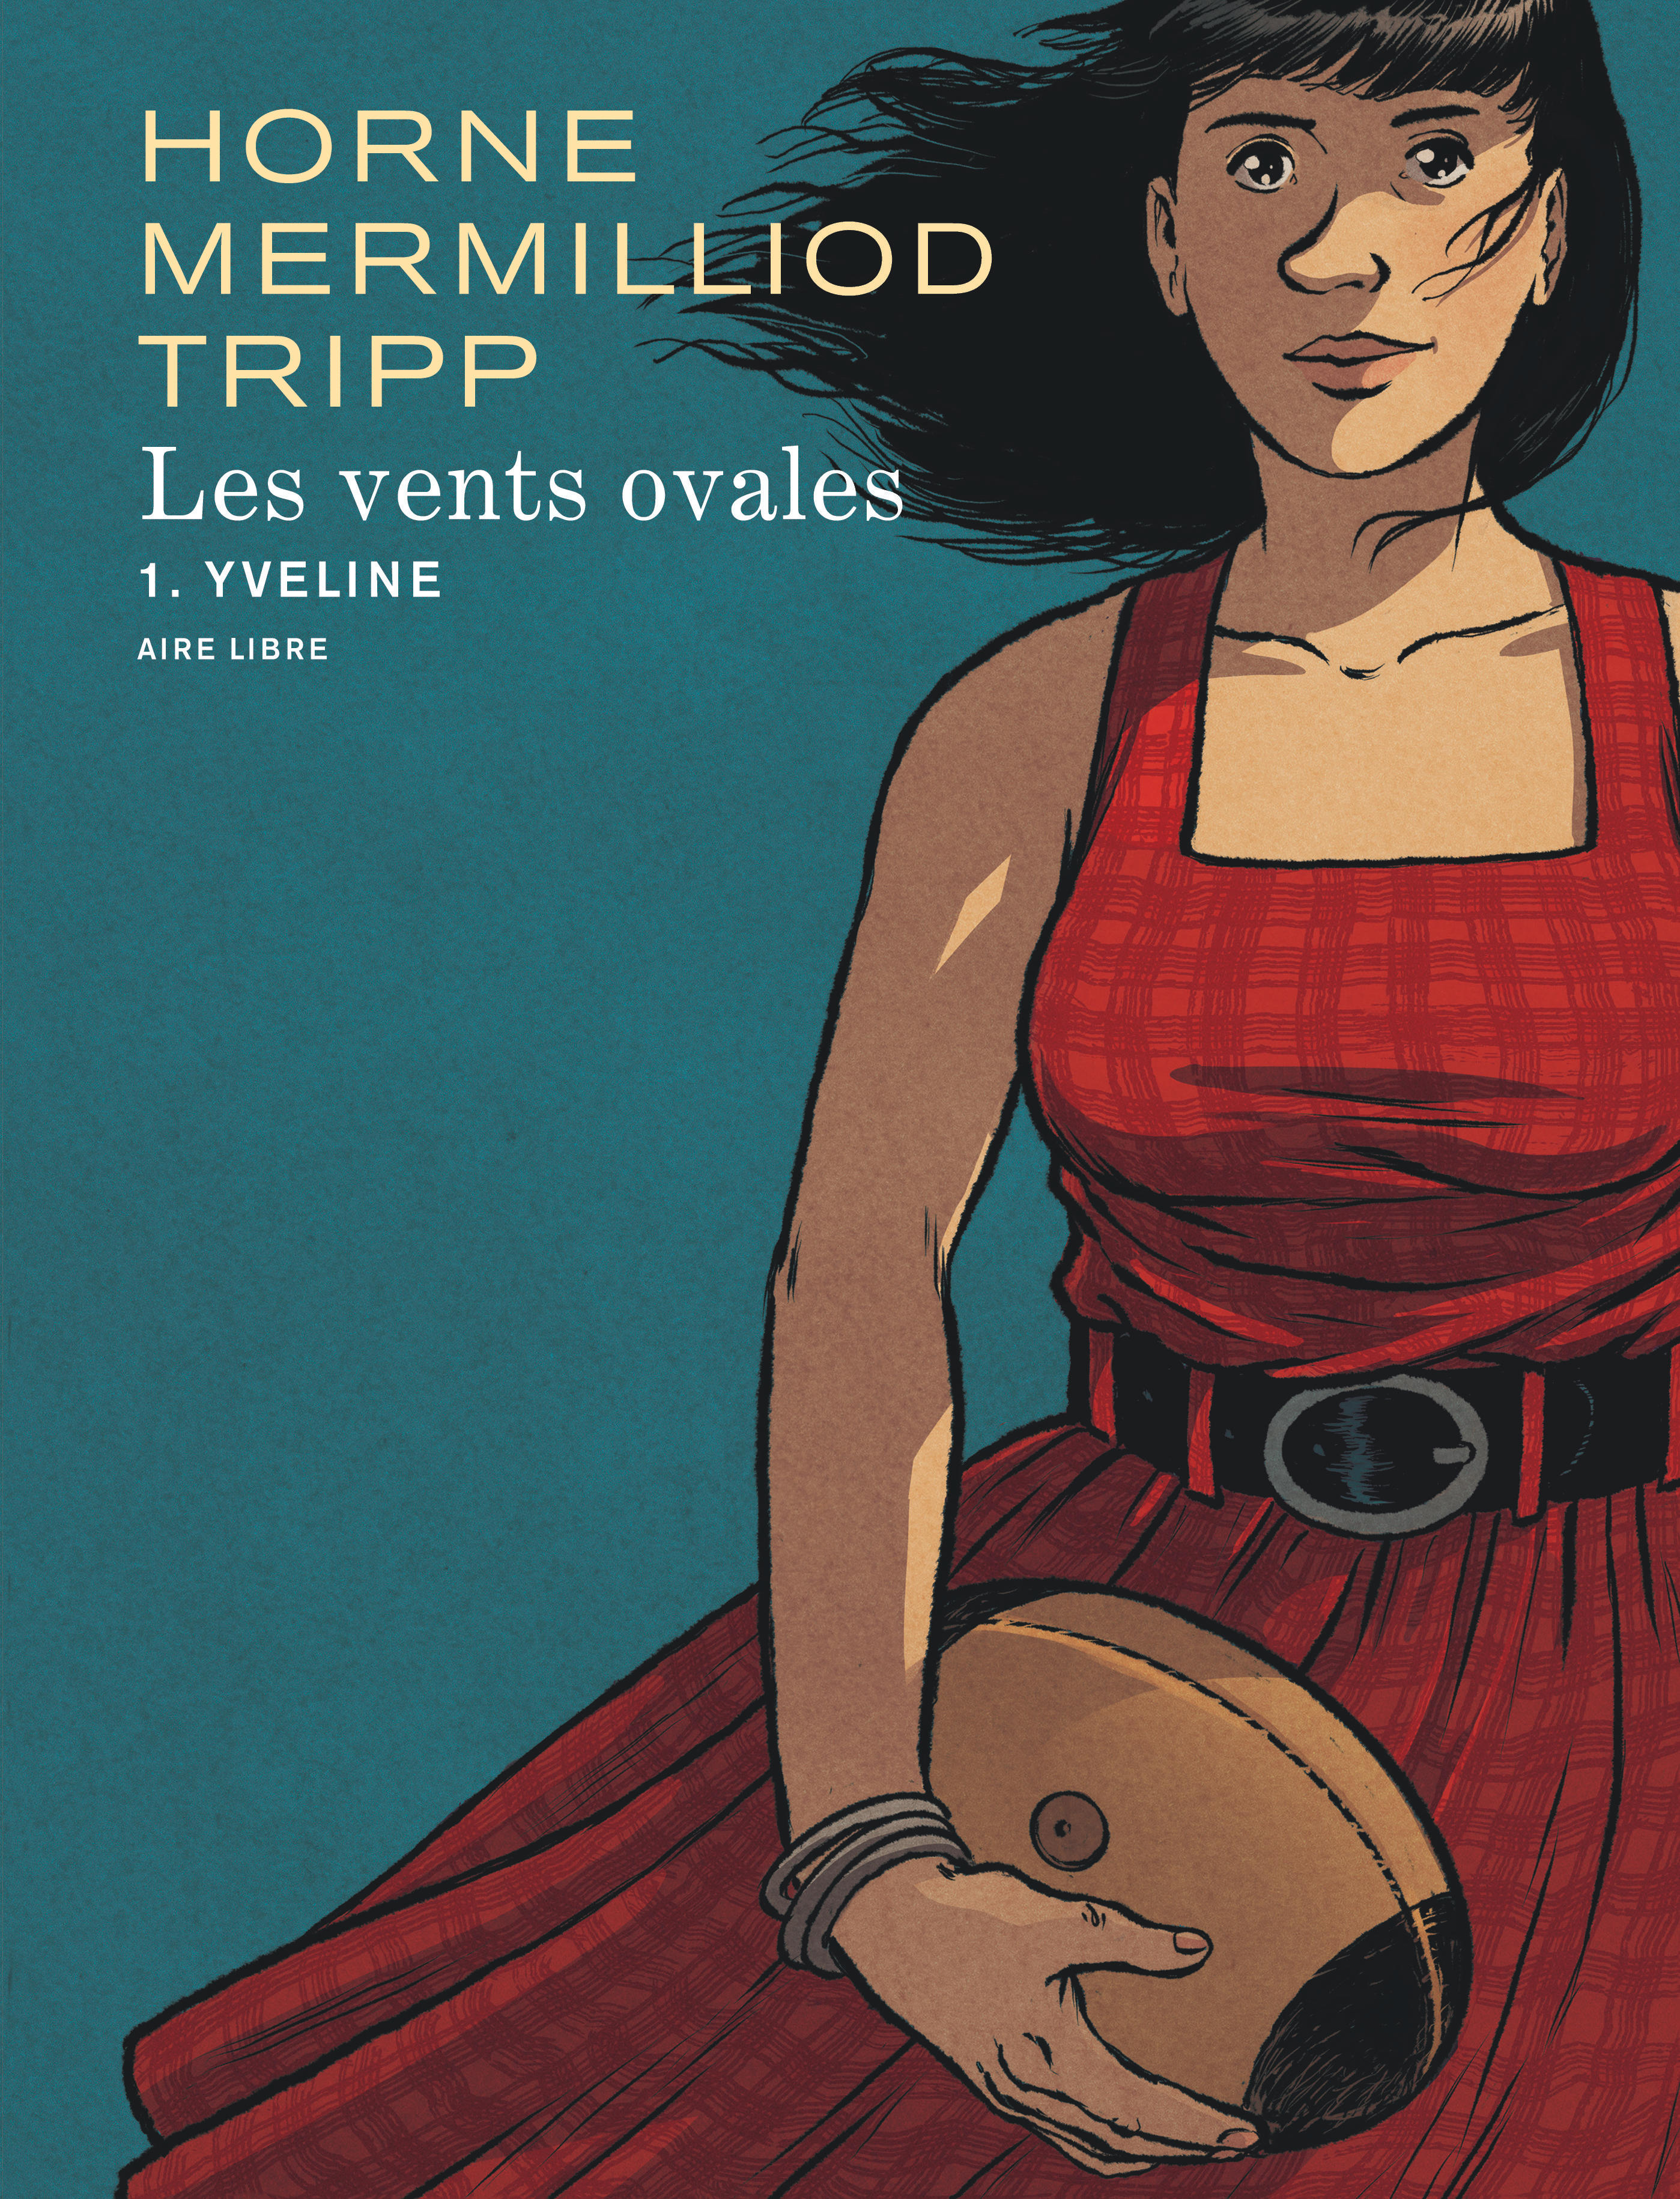 Les vents ovales – Tome 1 – Yveline - couv